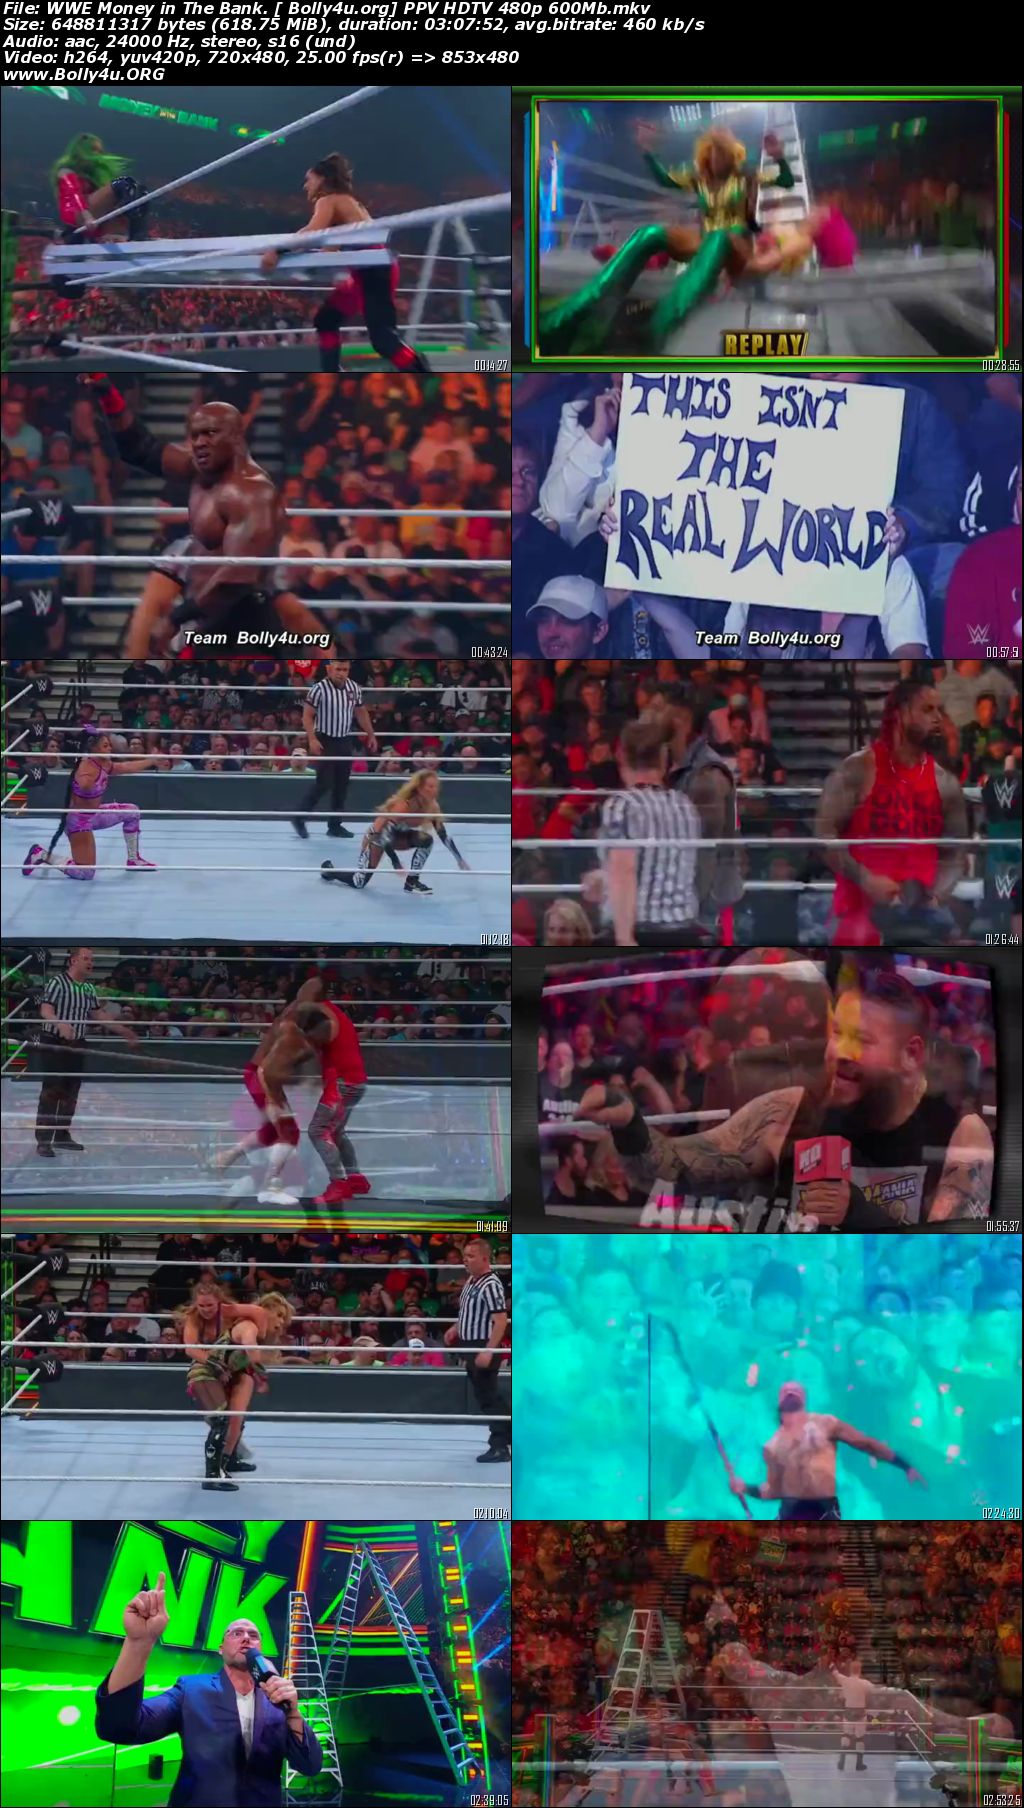 WWE Money in The Bank PPV HDTV 480p 600Mb 02 July 2022 Download